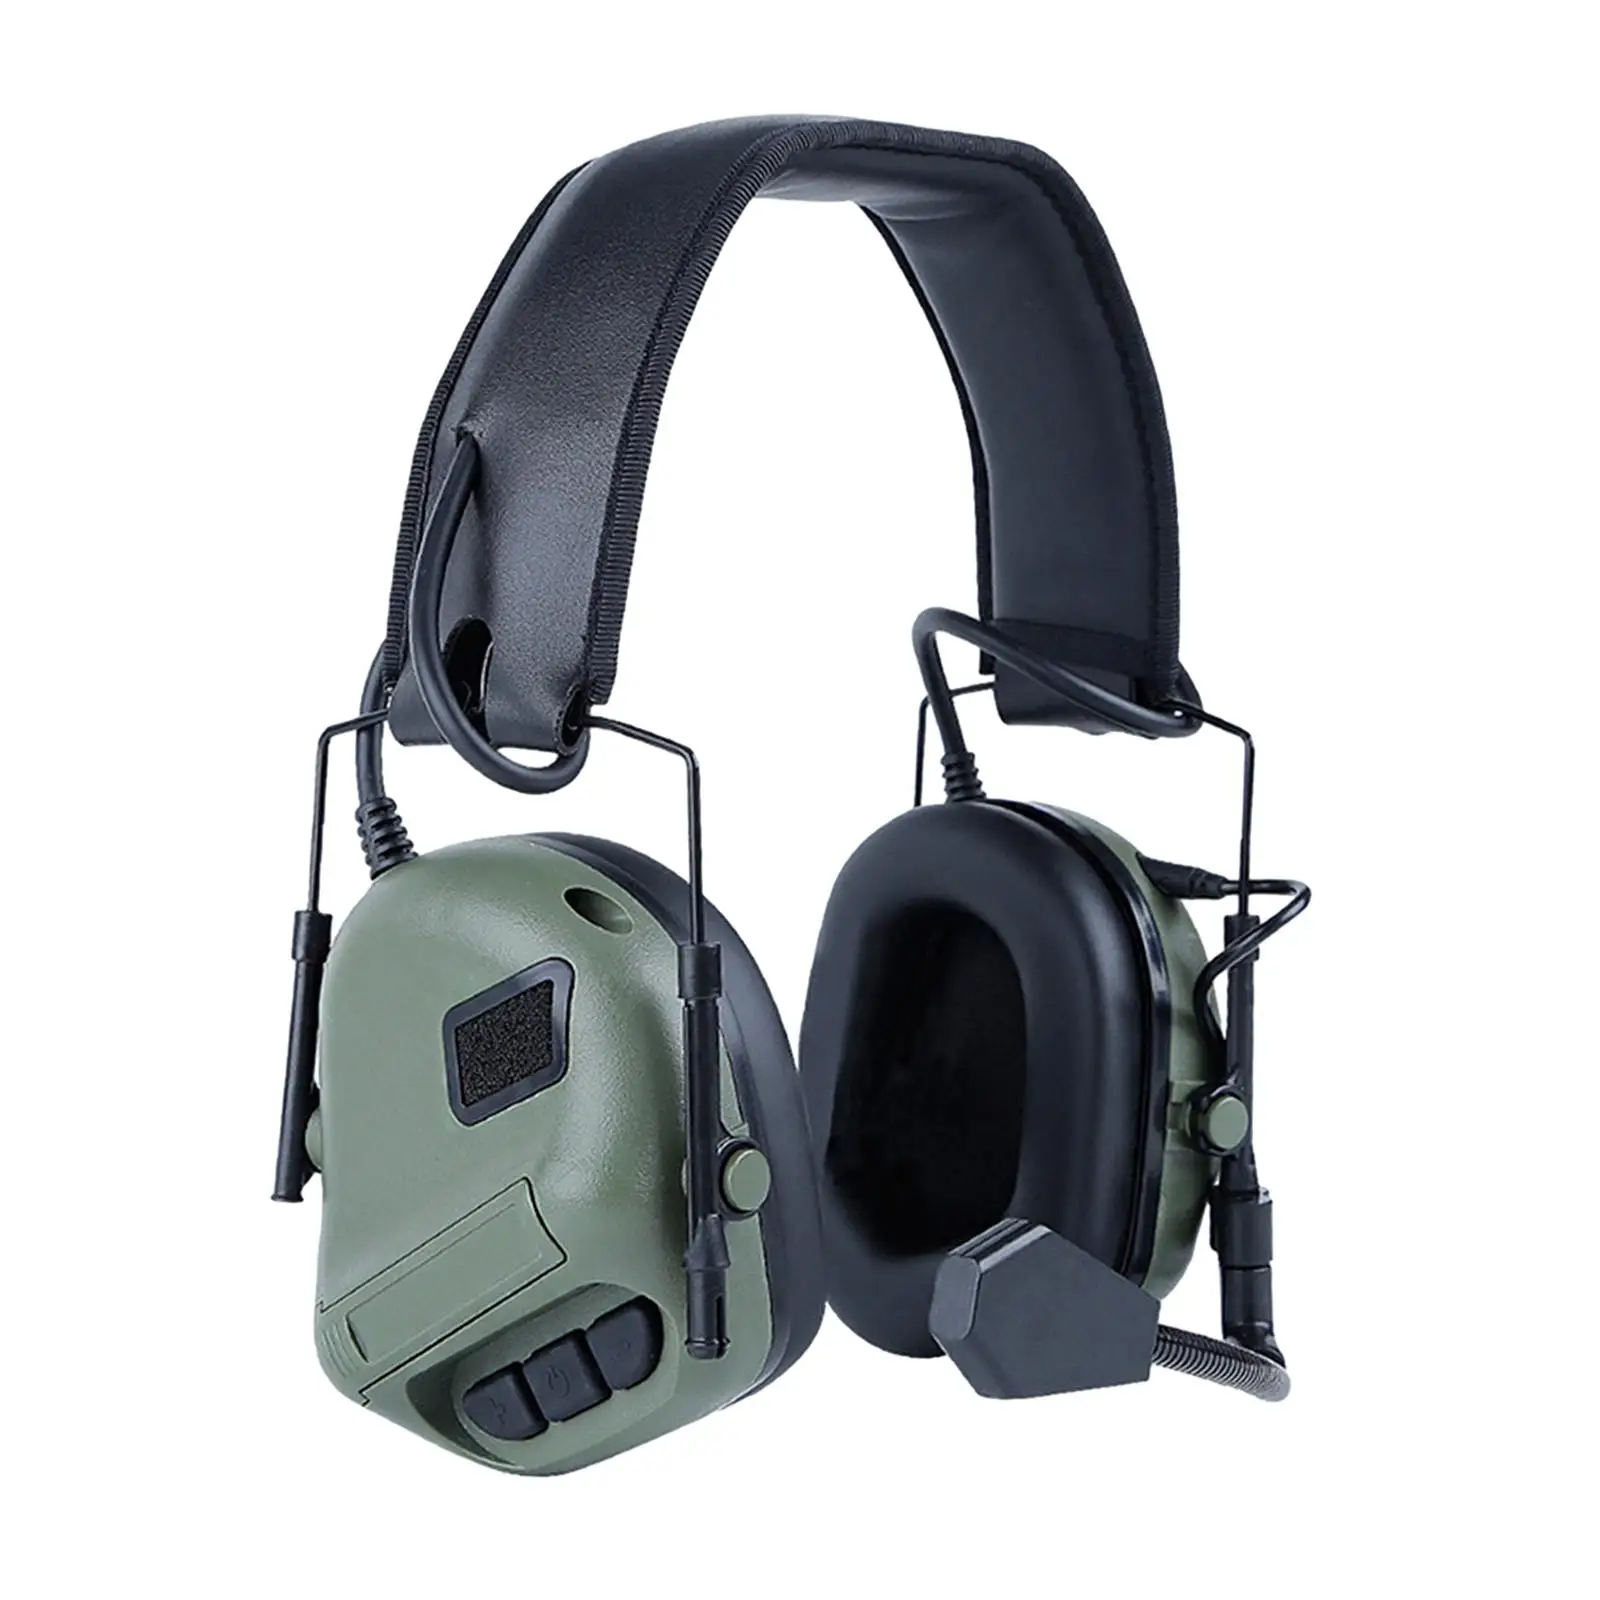 Hearing Ear Protection Compact Comfortable Ear Protector Soft Ear Cups for Construction Sleeping Manufacturing Business Studying